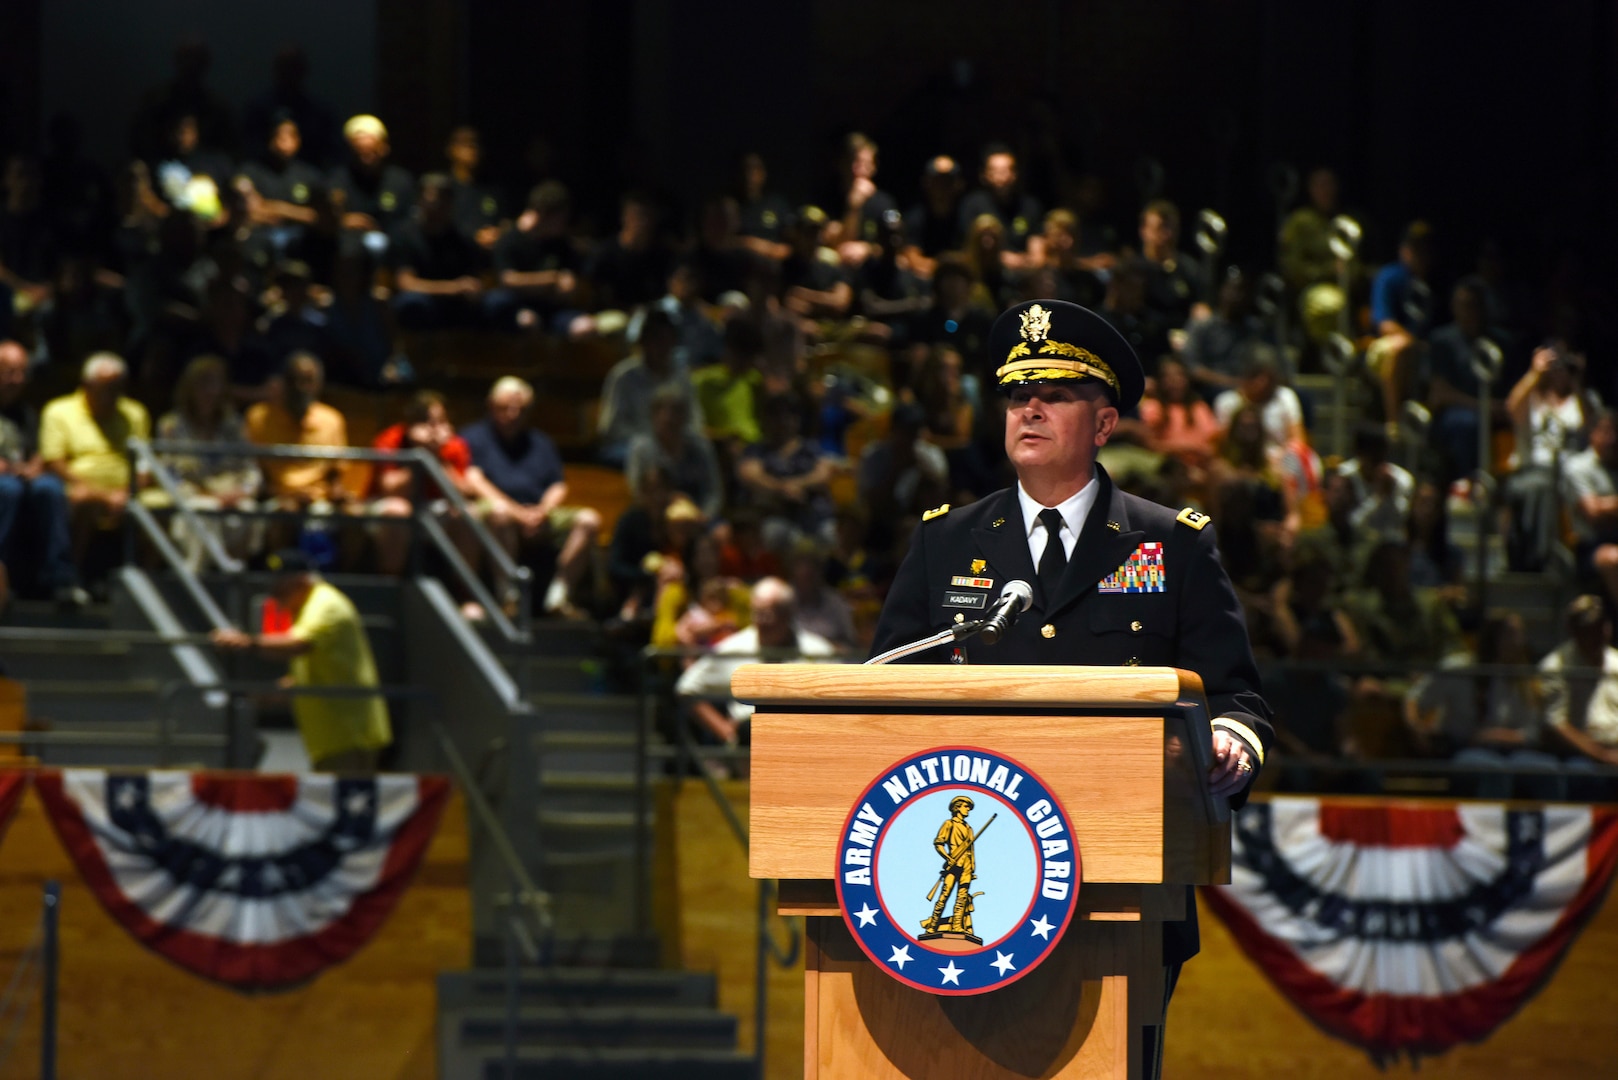 Army Lt. Gen. Timothy Kadavy, the director of the Army National Guard, speaks to more than 500 attendees during the Twilight Tattoo, July 18, 2018, at Joint Base Myer-Henderson Hall, Virginia. Kadavy served as host for the event, and recognized civilian employers of Guard members and administered the oath of enlistment to more than 50 future Soldiers.